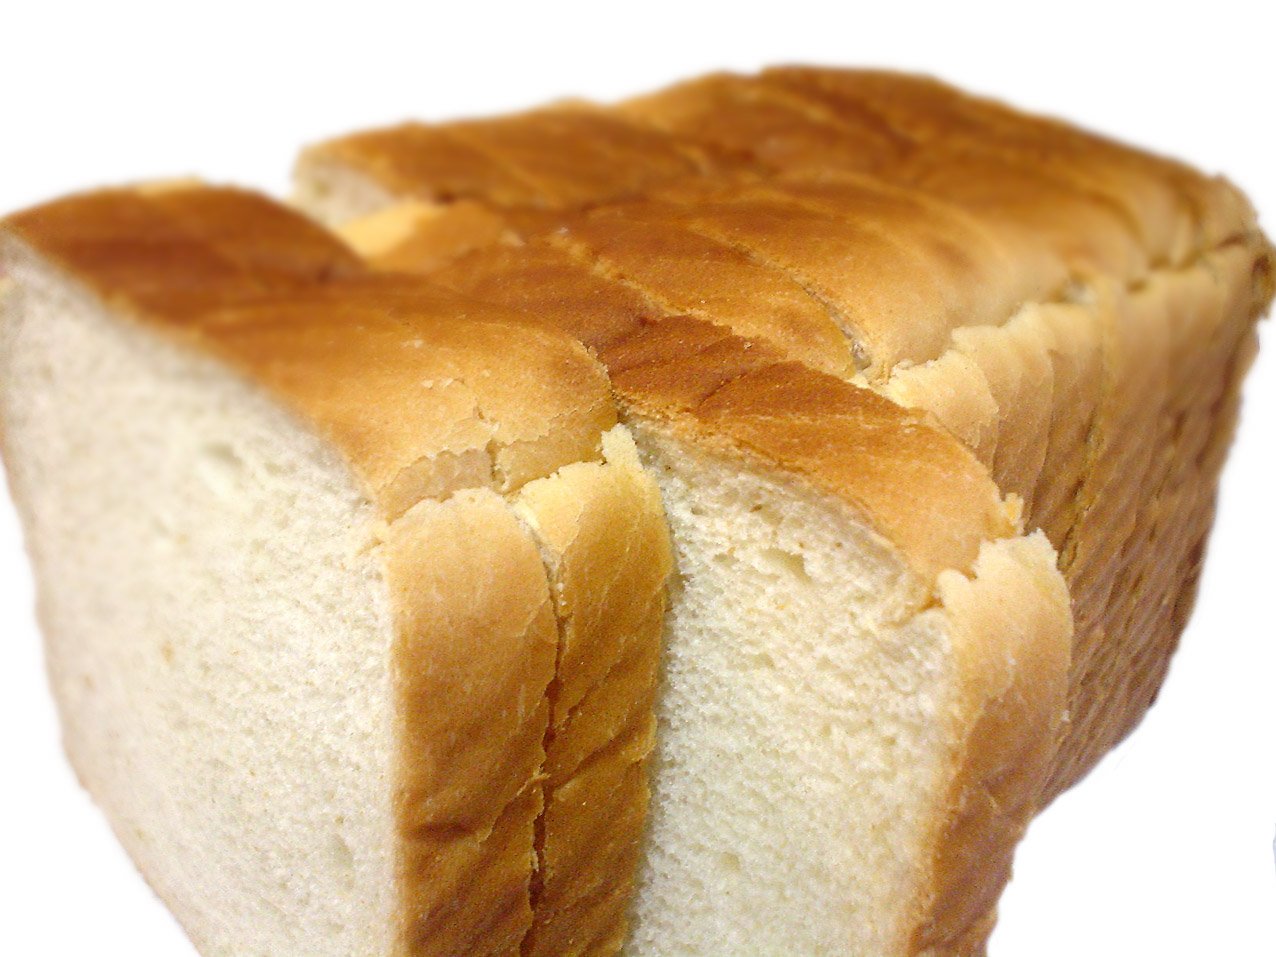 a close - up of a sliced piece of bread